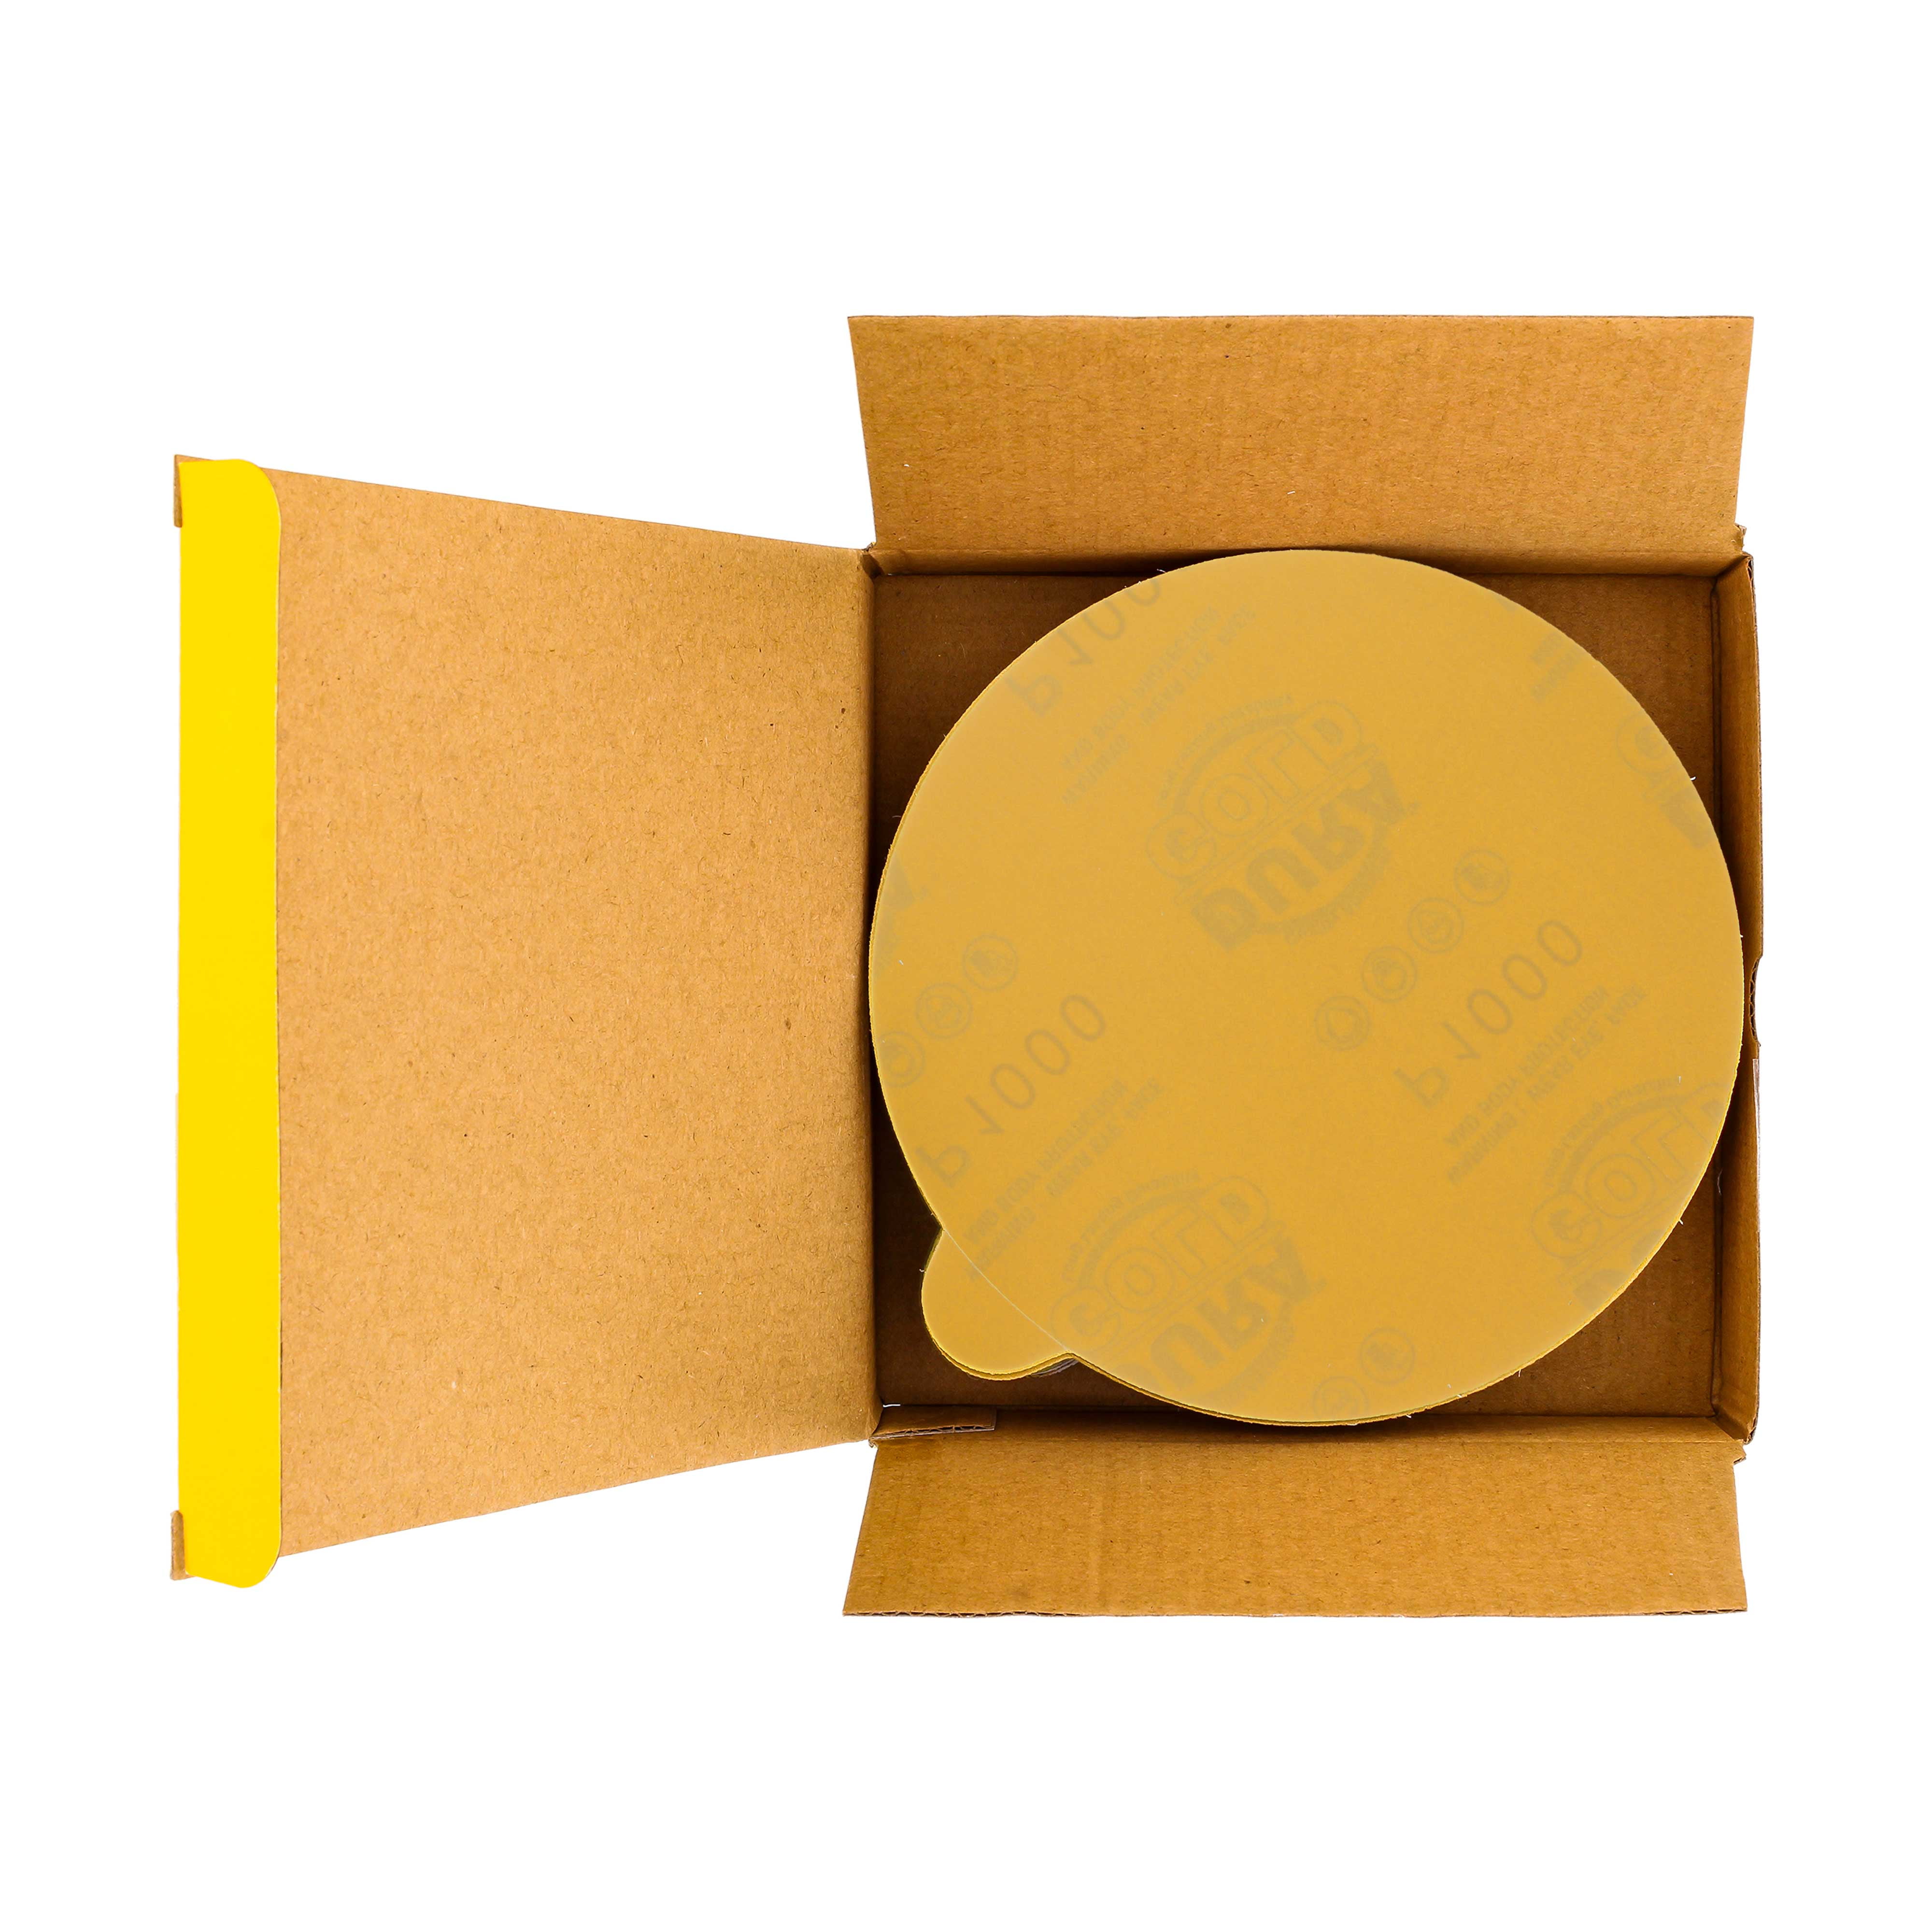 Dura-Gold Premium Box of 50 Sandpaper Finishing Discs for Automotive and Woodworking 800 Grit 6 Gold PSA Self Adhesive Stickyback Sanding Discs for DA Sanders 